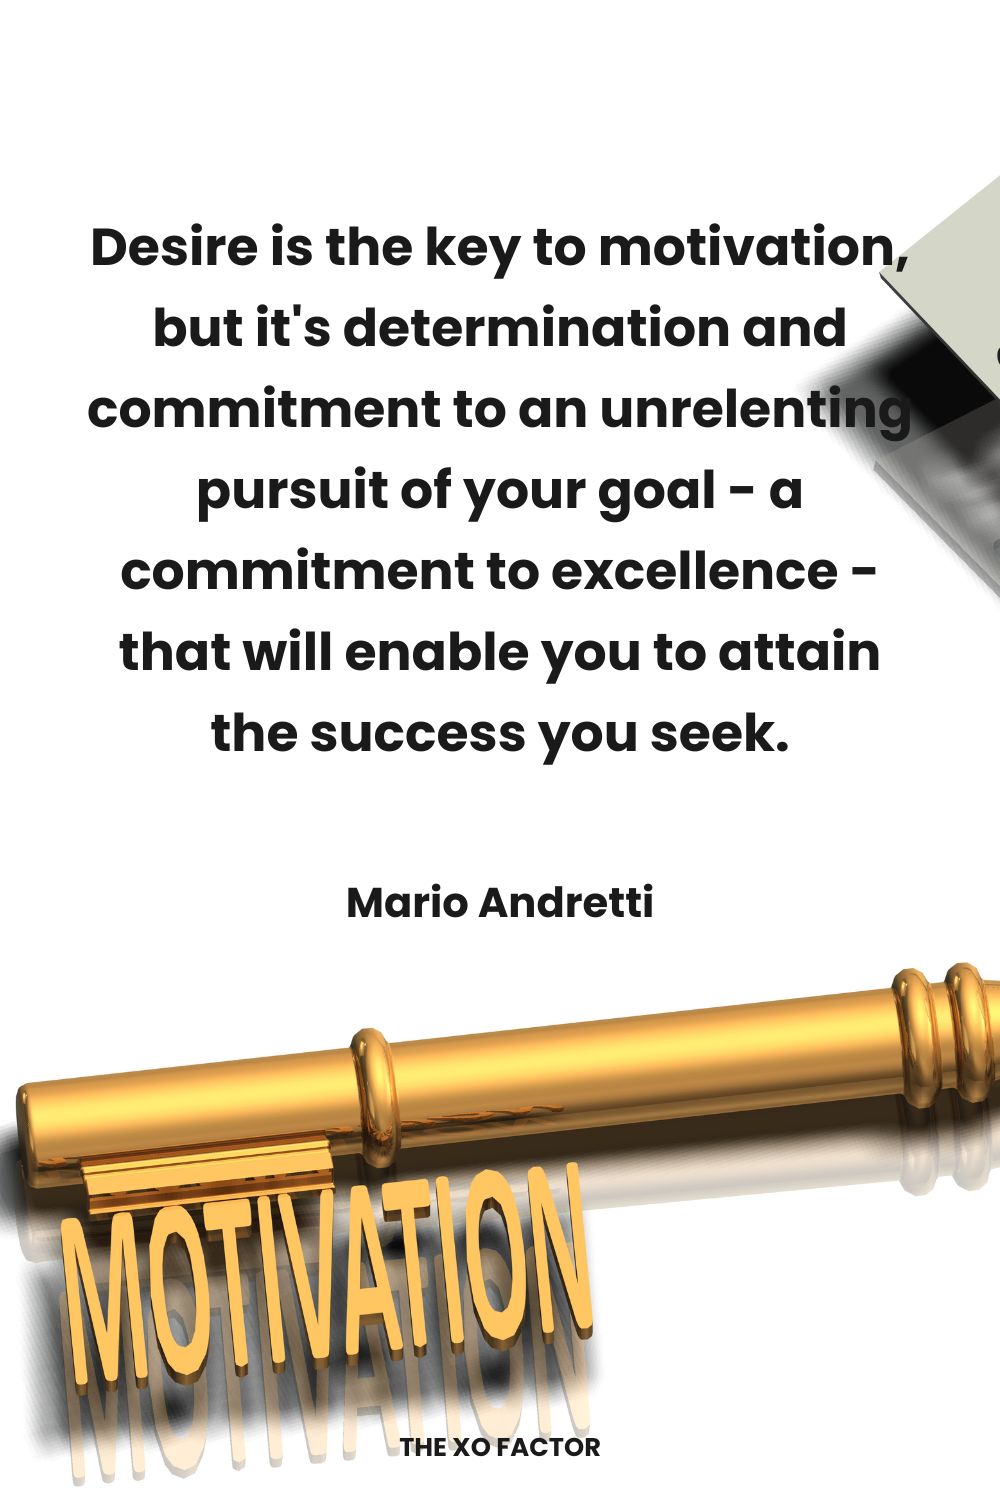 Desire is the key to motivation, but it's determination and commitment to an unrelenting pursuit of your goal - a commitment to excellence - that will enable you to attain the success you seek.